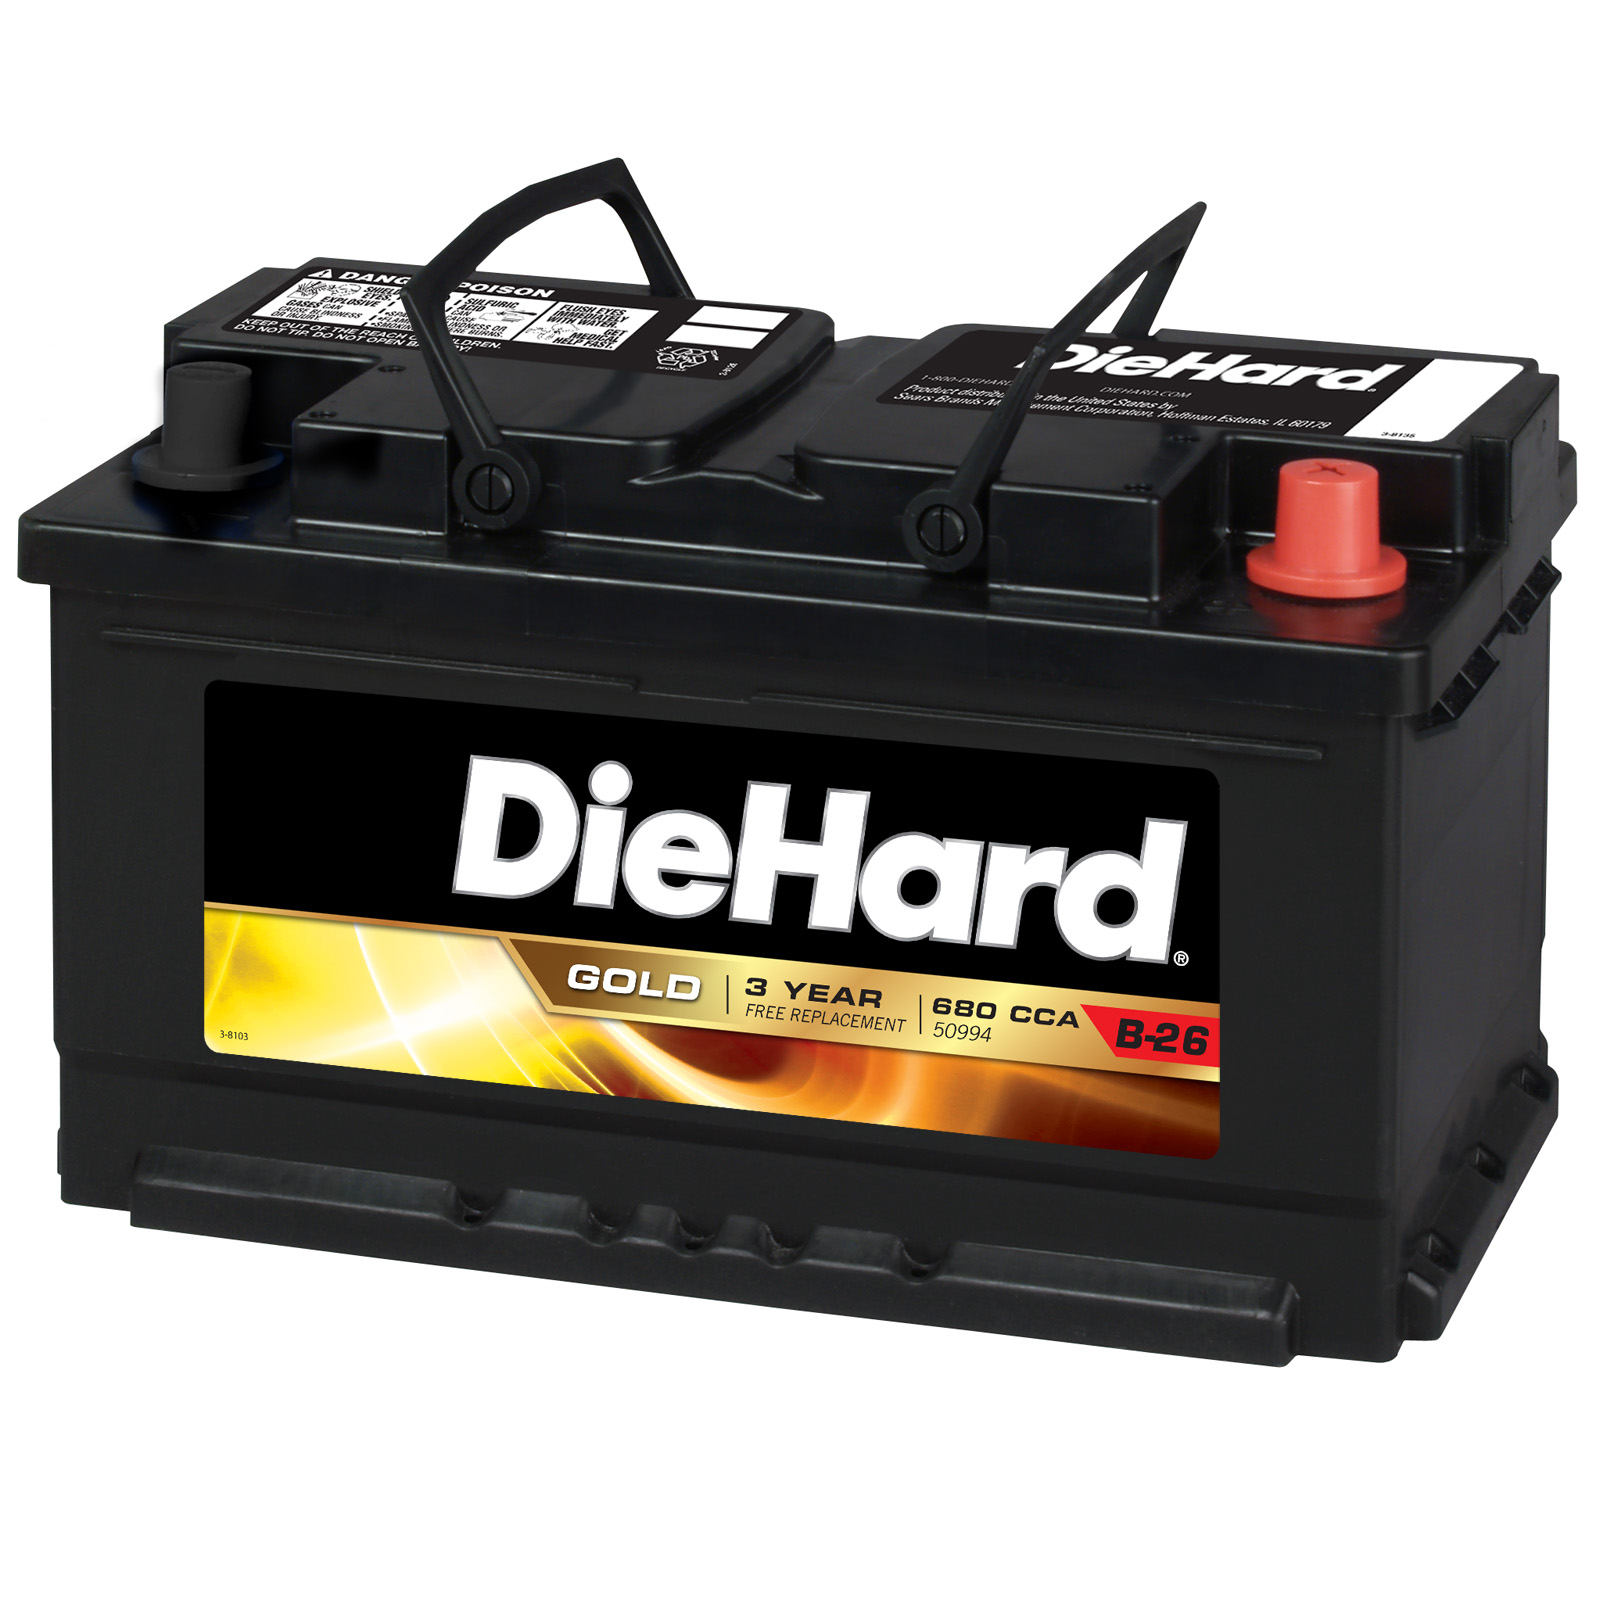 DieHard Gold Automotive Battery - Group Size EP-94R (Price with Exchange)